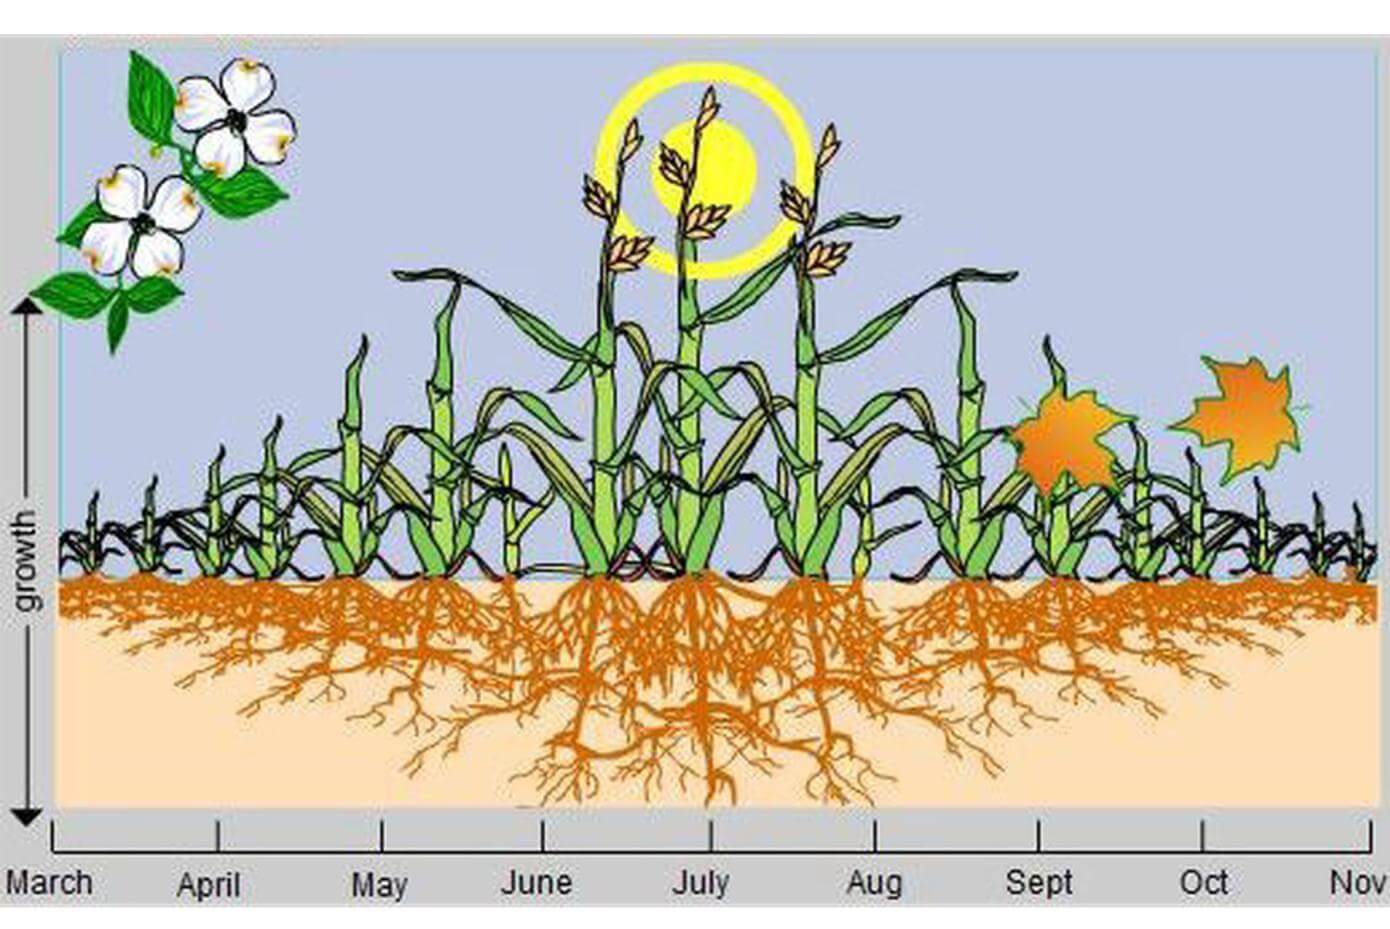 Illustration showing the growth of grass during each month of the year.